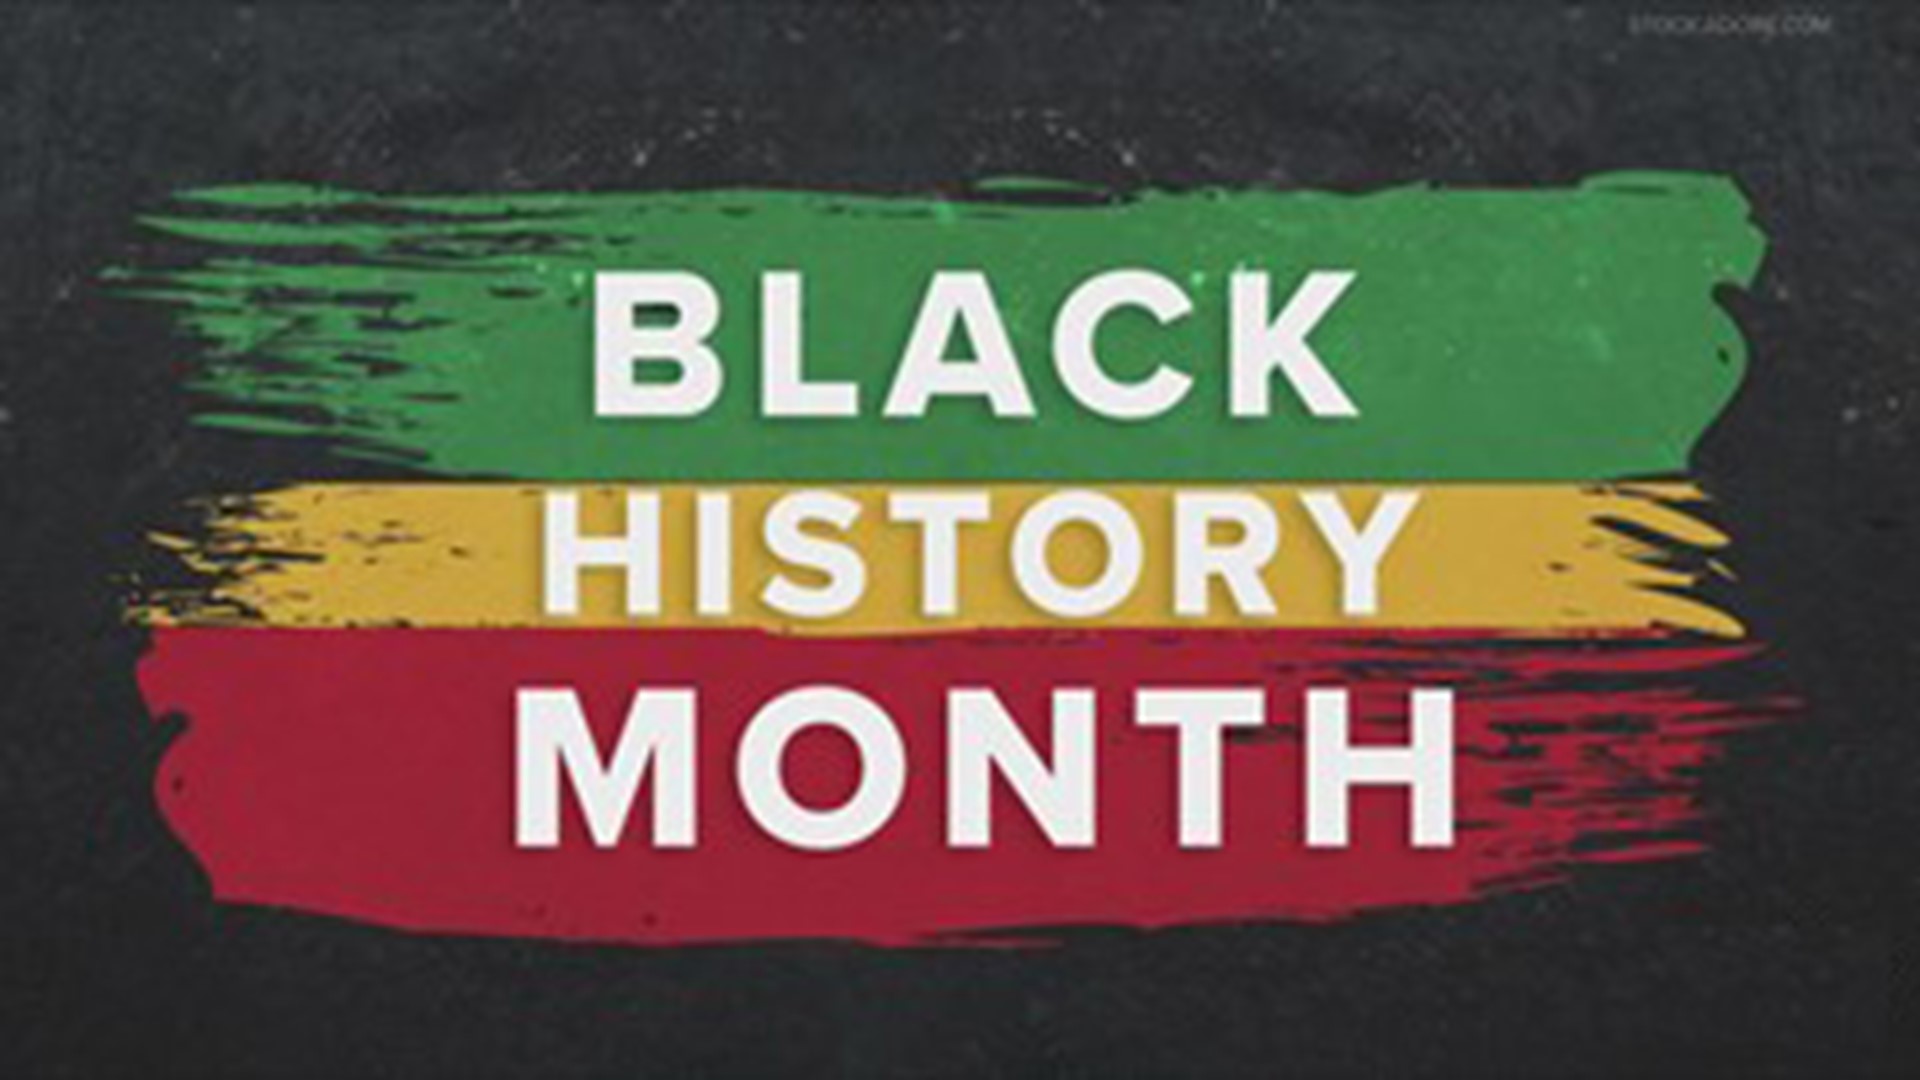 Black History Month: What happened in 1920?